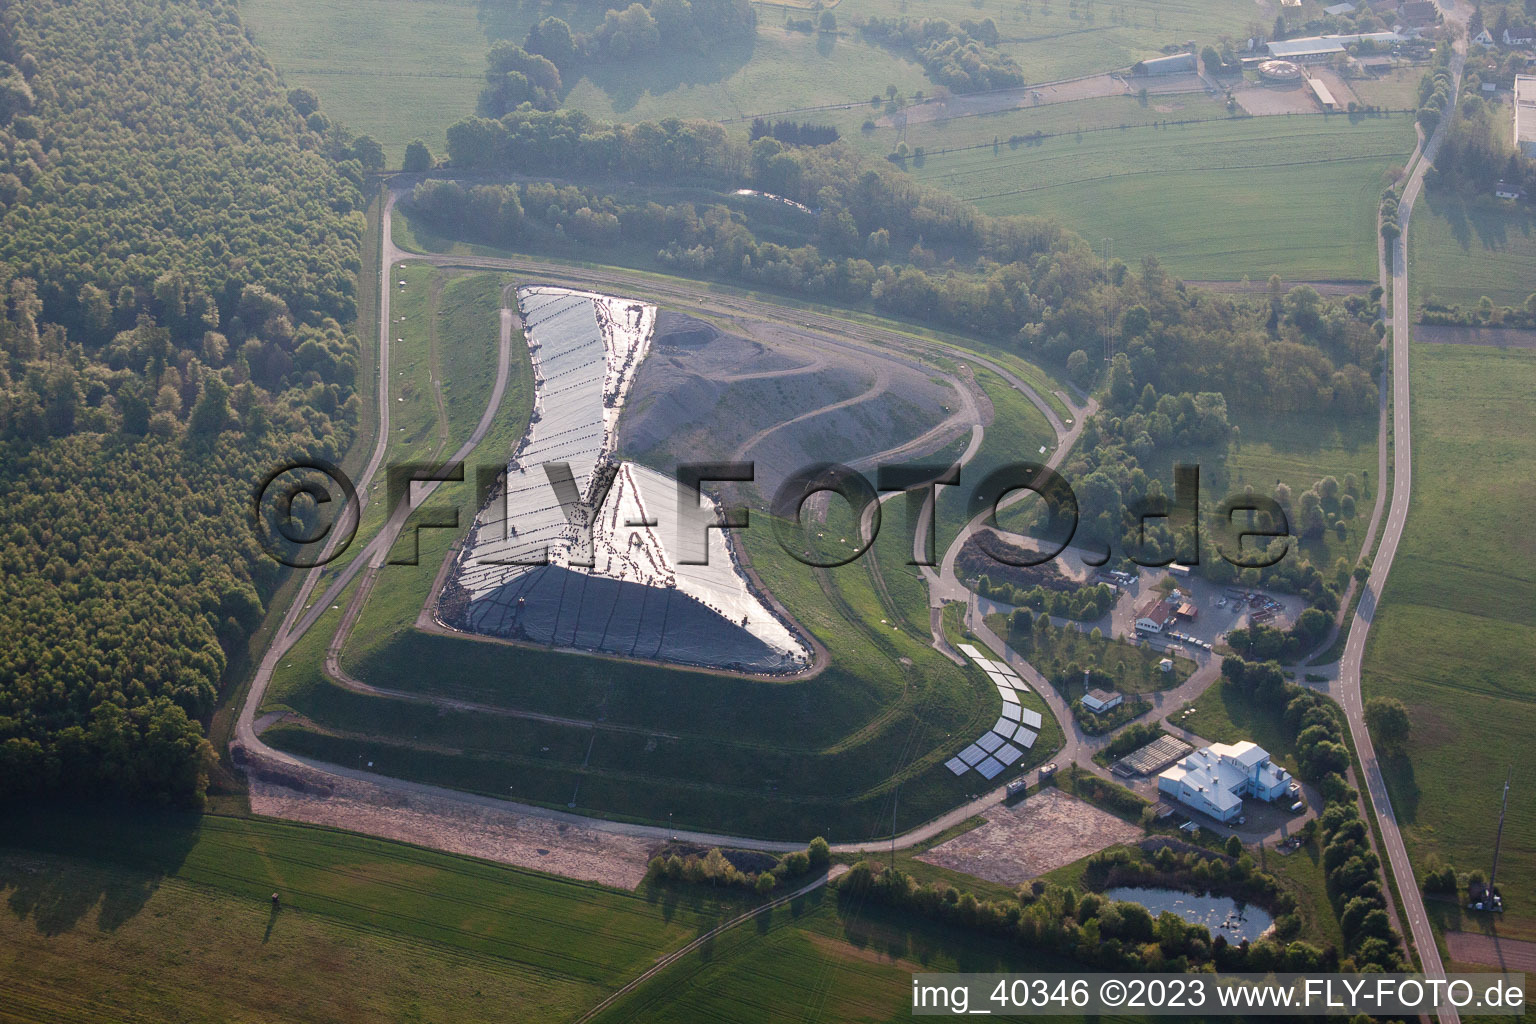 District landfill in Scheibenhardt in the state Rhineland-Palatinate, Germany seen from above